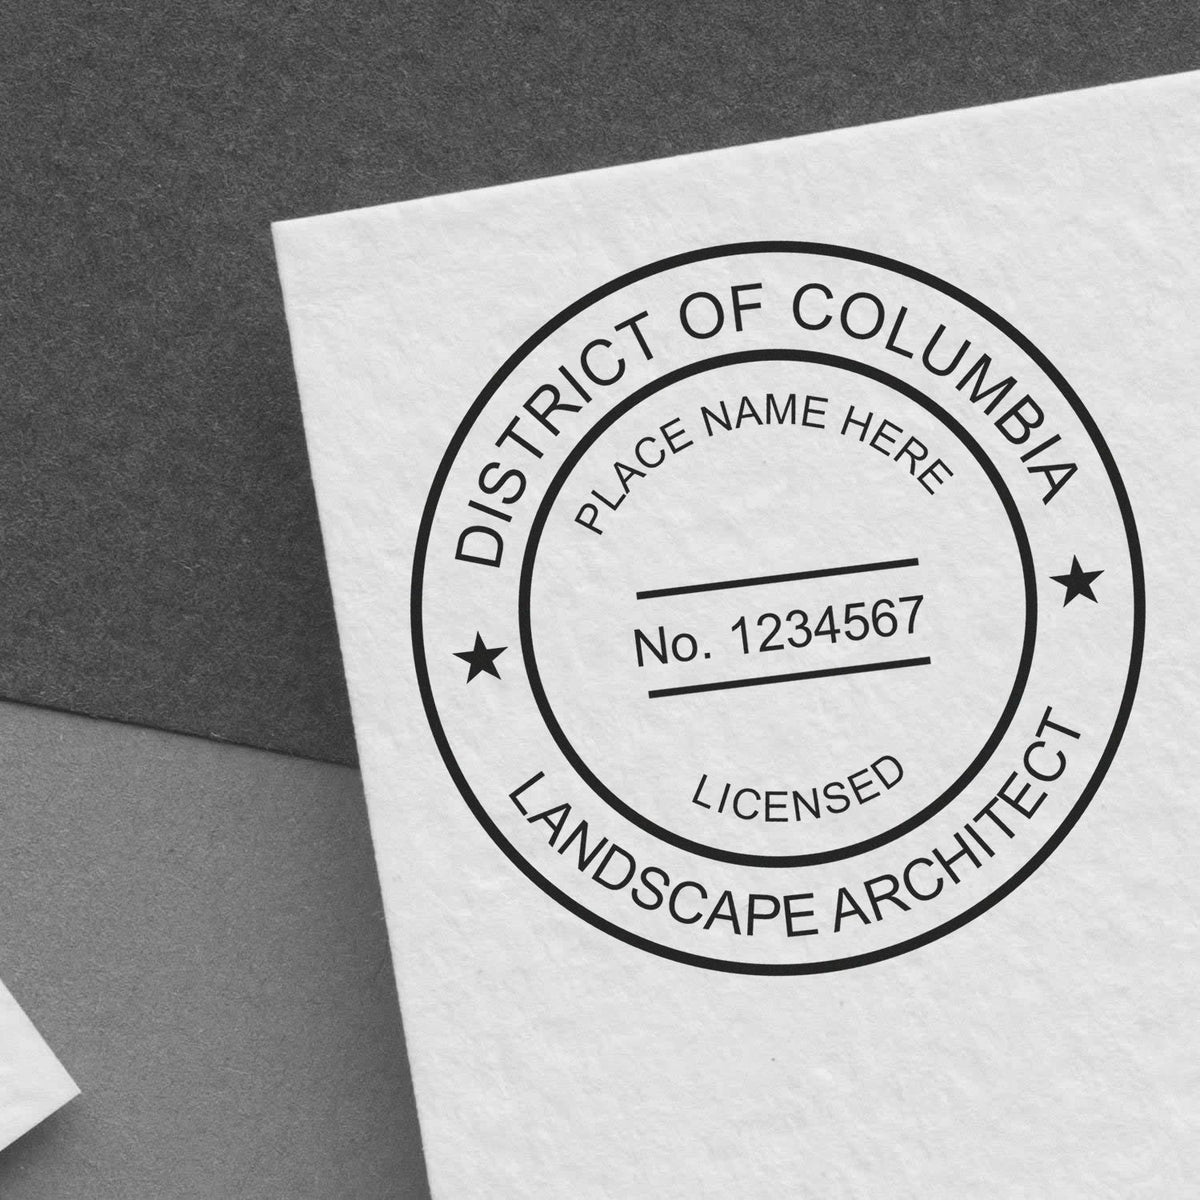 A stamped impression of the Digital District of Columbia Landscape Architect Stamp in this stylish lifestyle photo, setting the tone for a unique and personalized product.